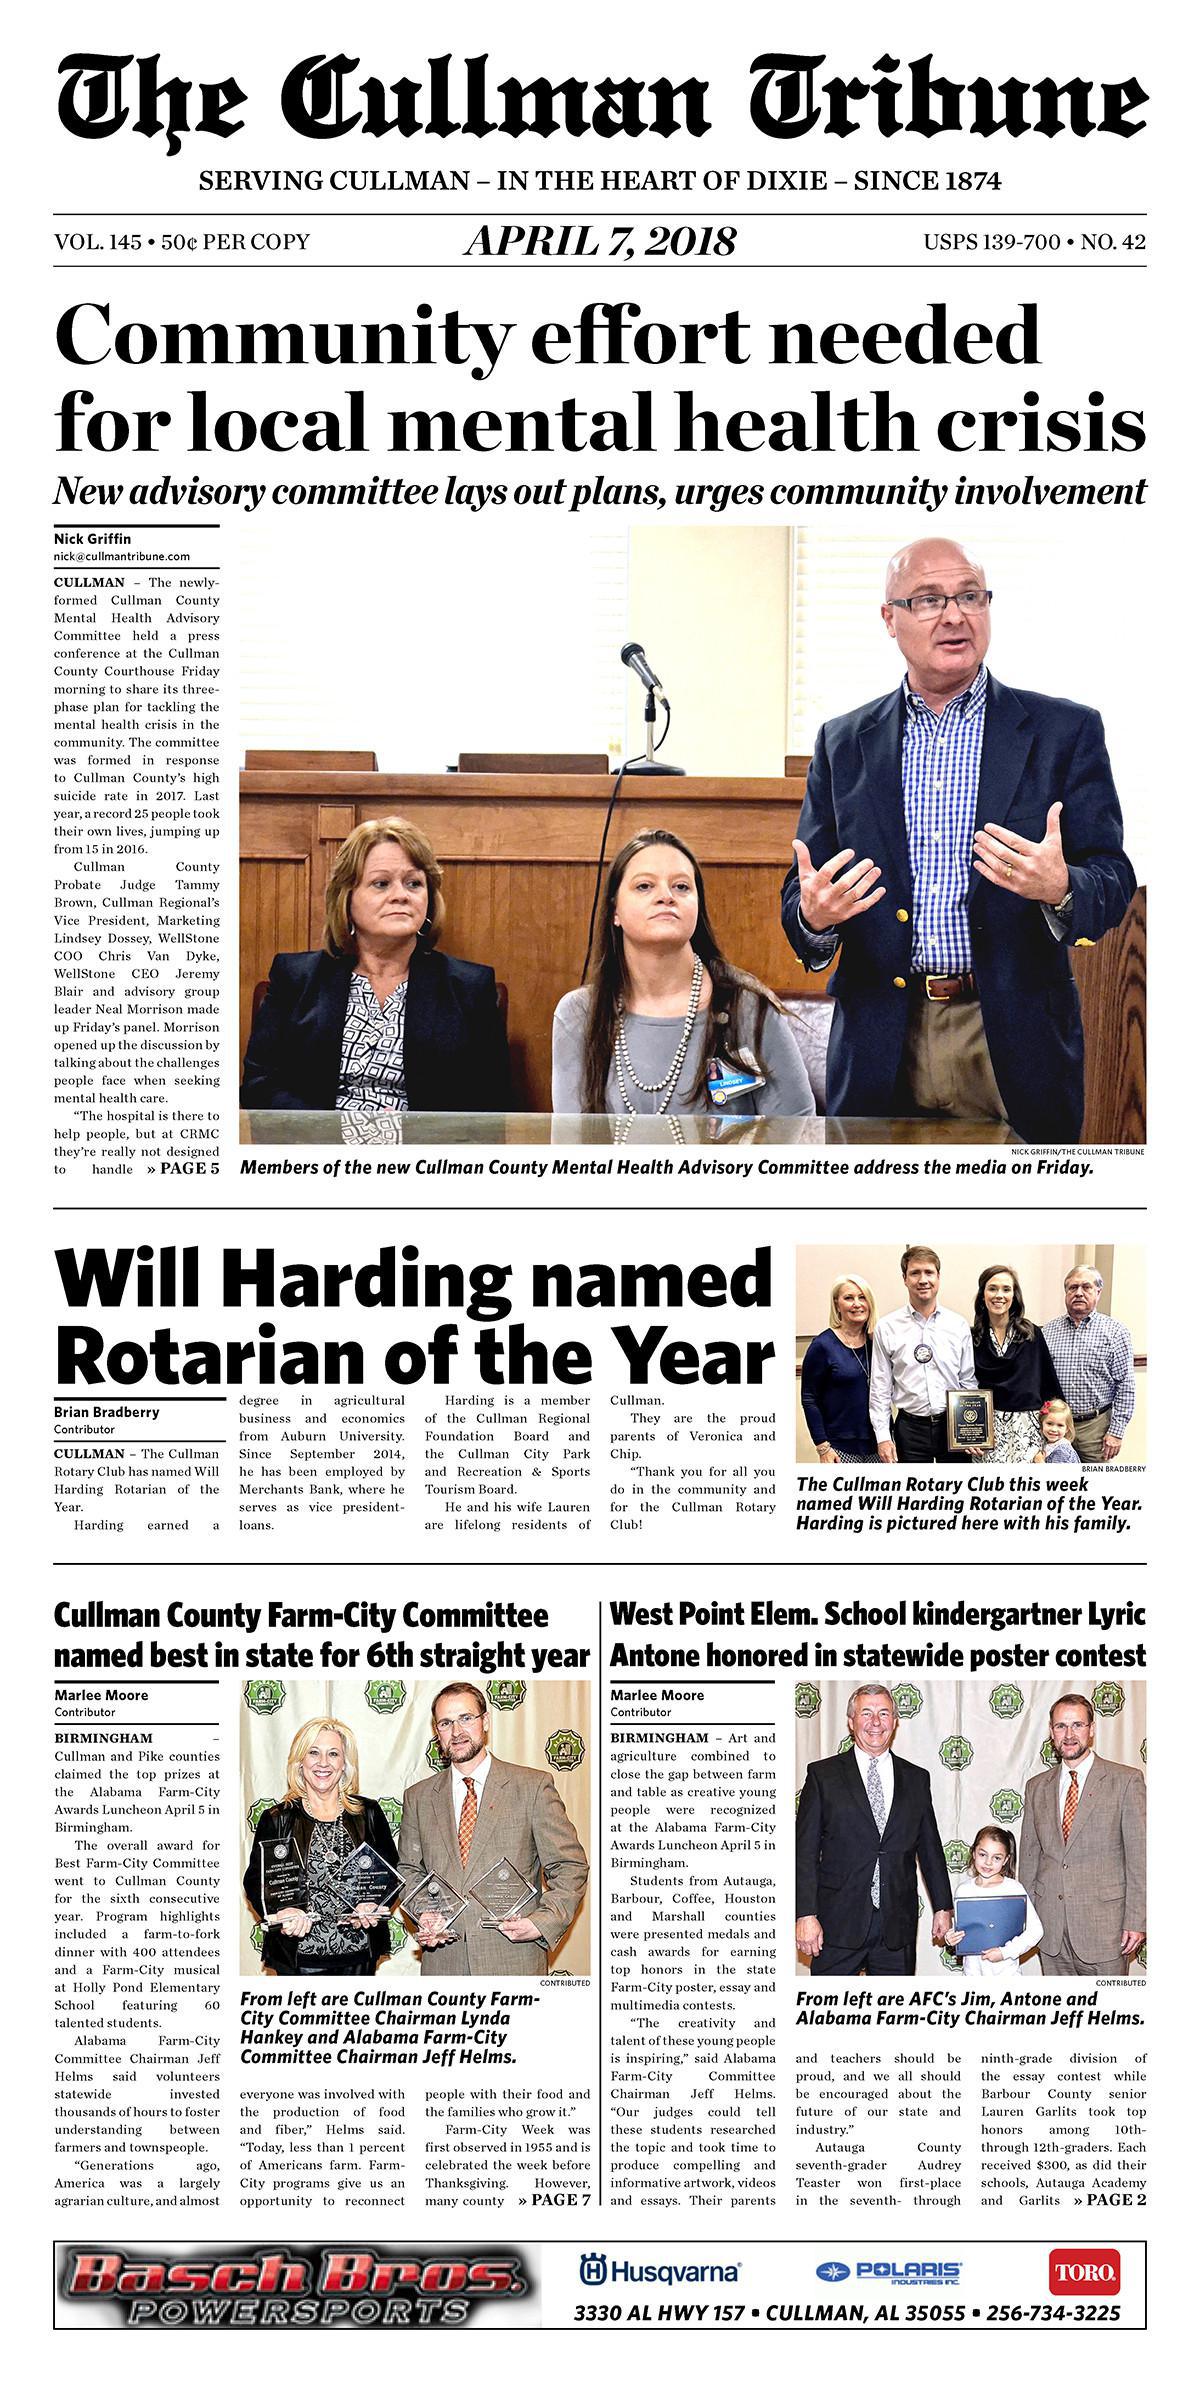 Good Morning Cullman! The 04-07-2018 edition of the Cullman Tribune is now ready to view